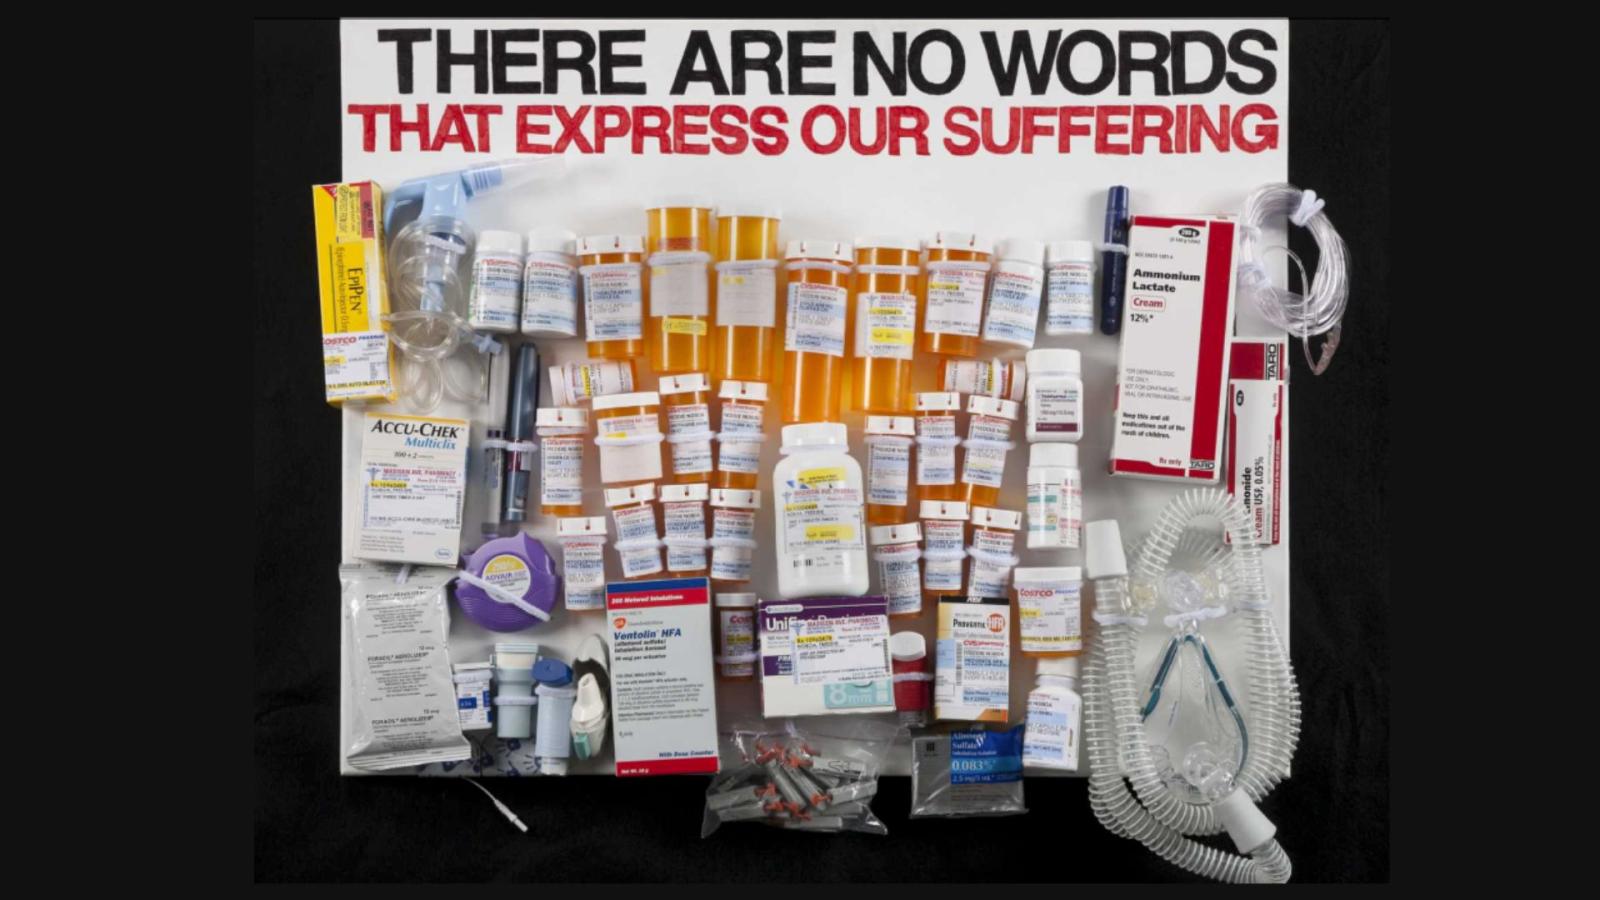 Protest sign with the text "There are No Words That Express Our Suffering" and images of medical supplies like prescription bottles